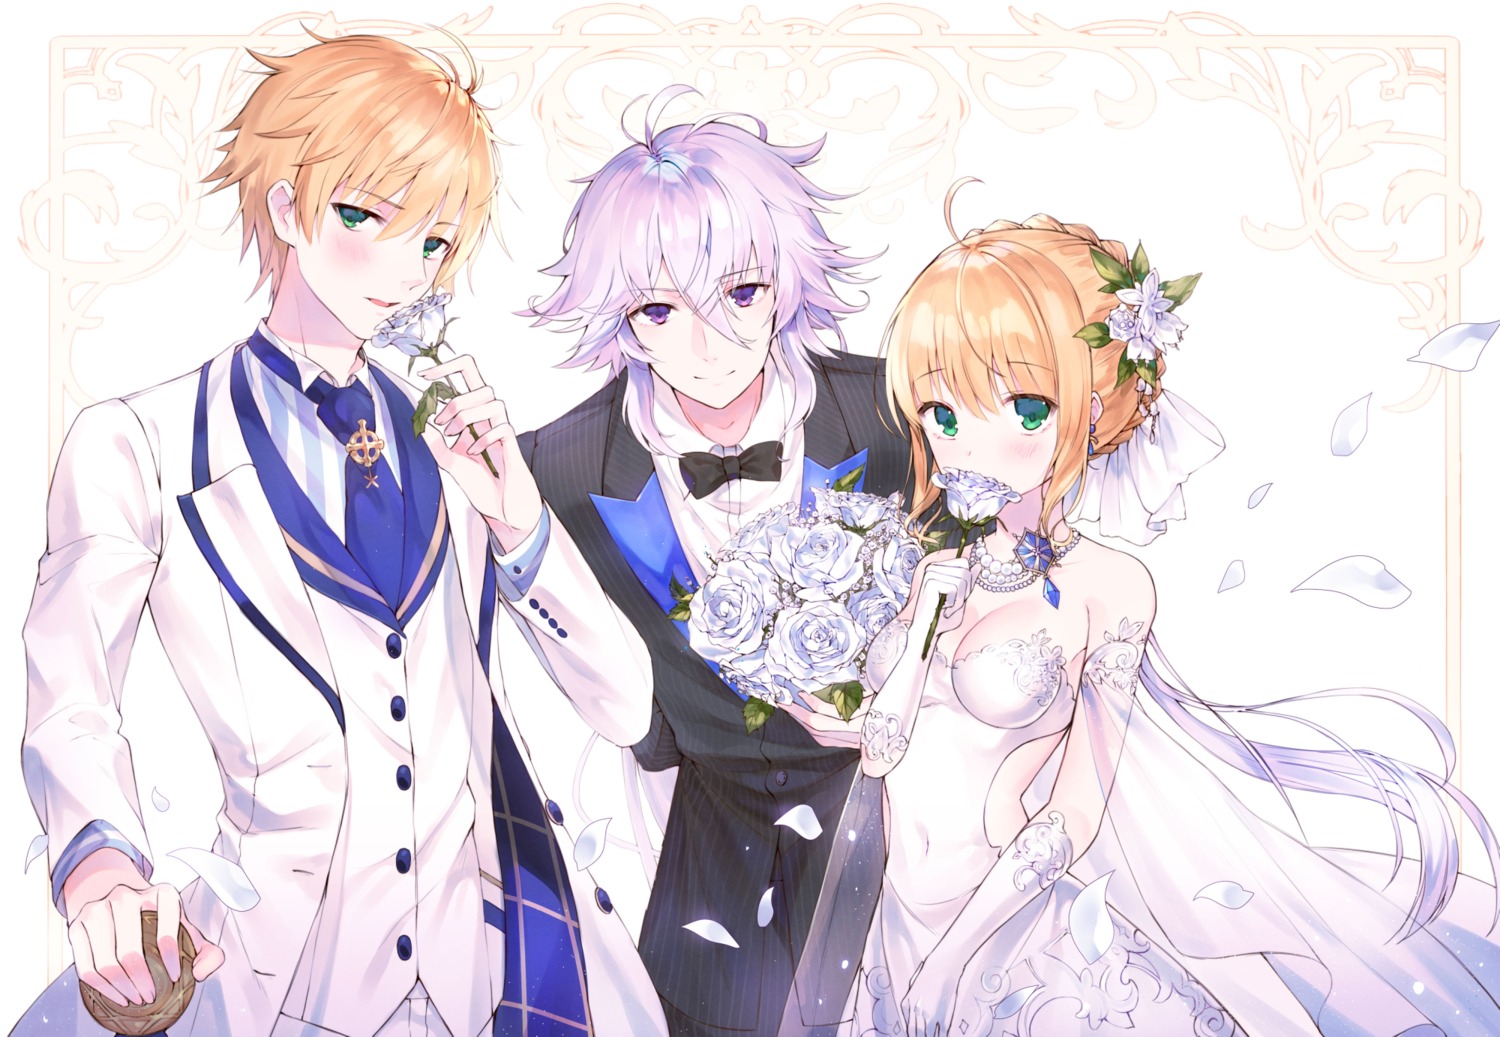 Kh Kh 1128 Fate Grand Order Merlin Fate Stay Night Saber Saber Fate Prototype Saber Lily Cleavage Dress Wedding Dress 453631 Yande Re